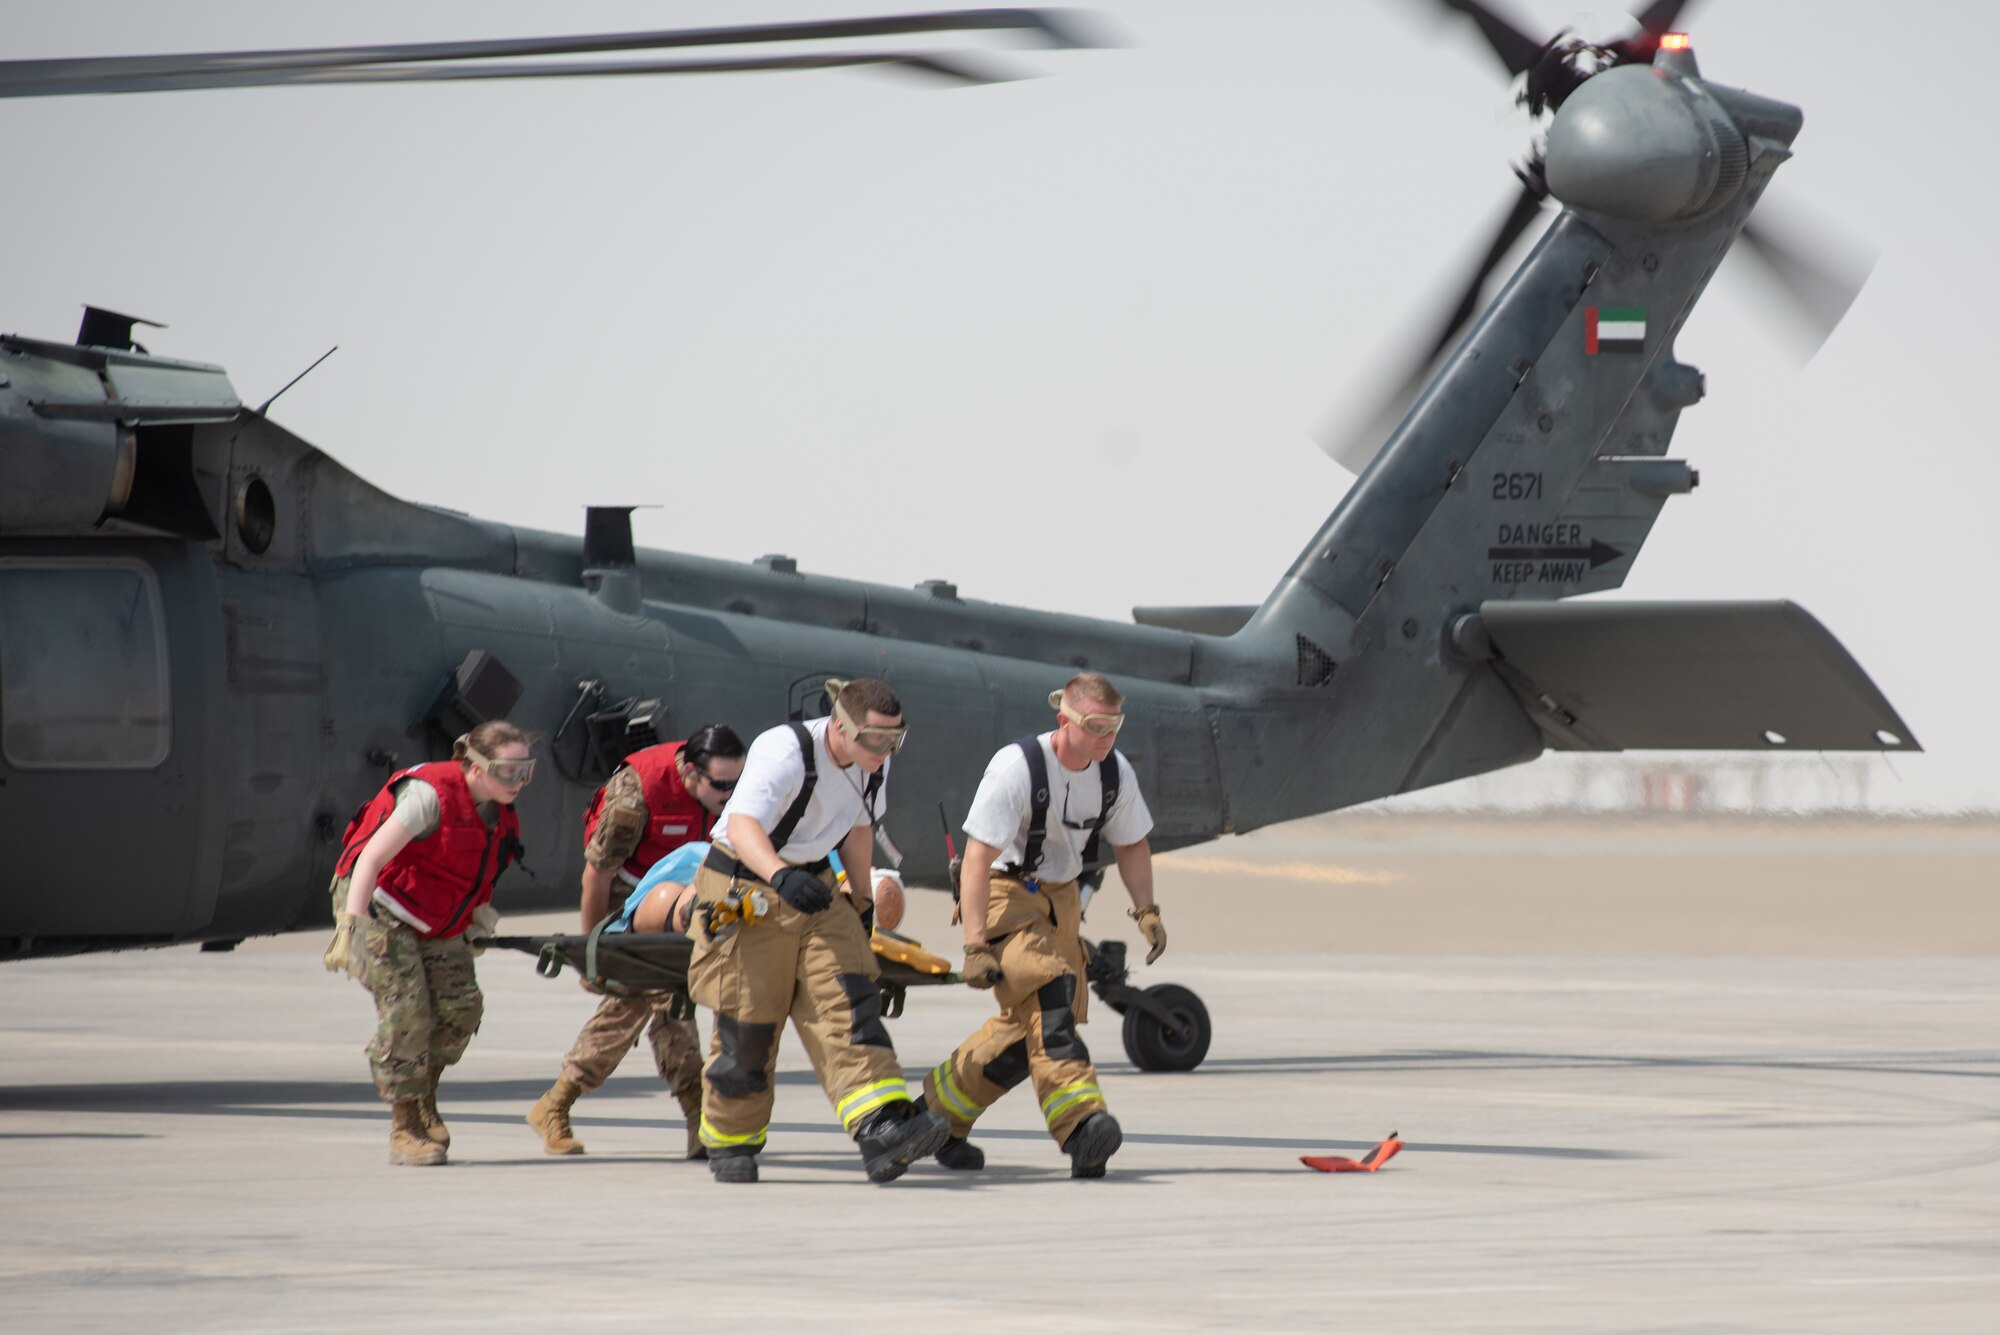 380th Air Expeditionary Wing firefighters and medics remove a simulated patient from an Emirati UH-60 Black Hawk during a large first responder exercise Sept. 24, 2019, at Al Dhafra Air Base, United Arab Emirates. The exercise helped foster partnership with the United Arab Emirates Air Force Joint Aviation Command to practice an aeromedical evacuation scenario via helicopter. (U.S. Air Force photo by Staff Sgt. Chris Thornbury)